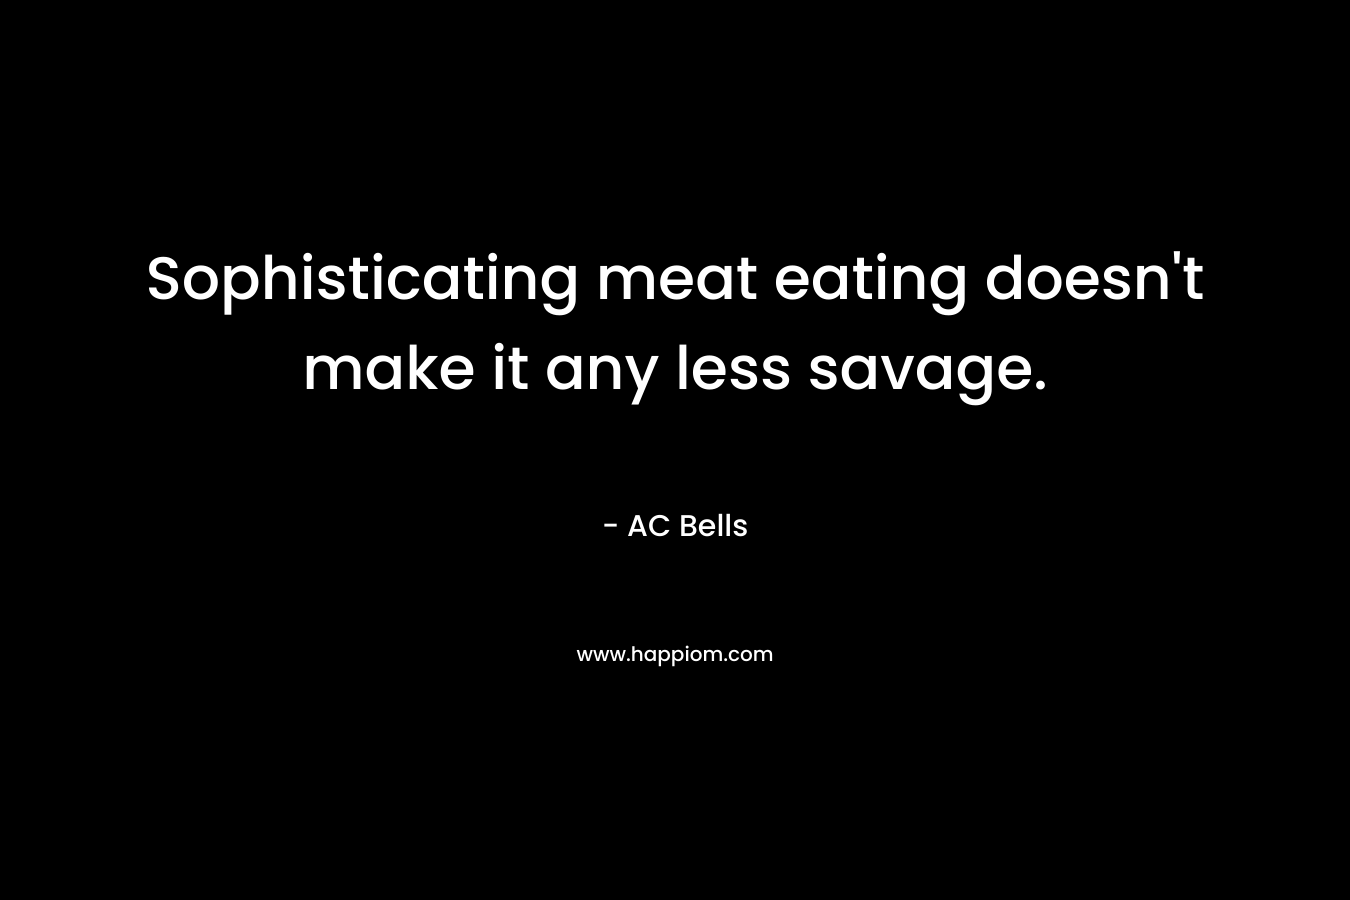 Sophisticating meat eating doesn’t make it any less savage. – AC Bells